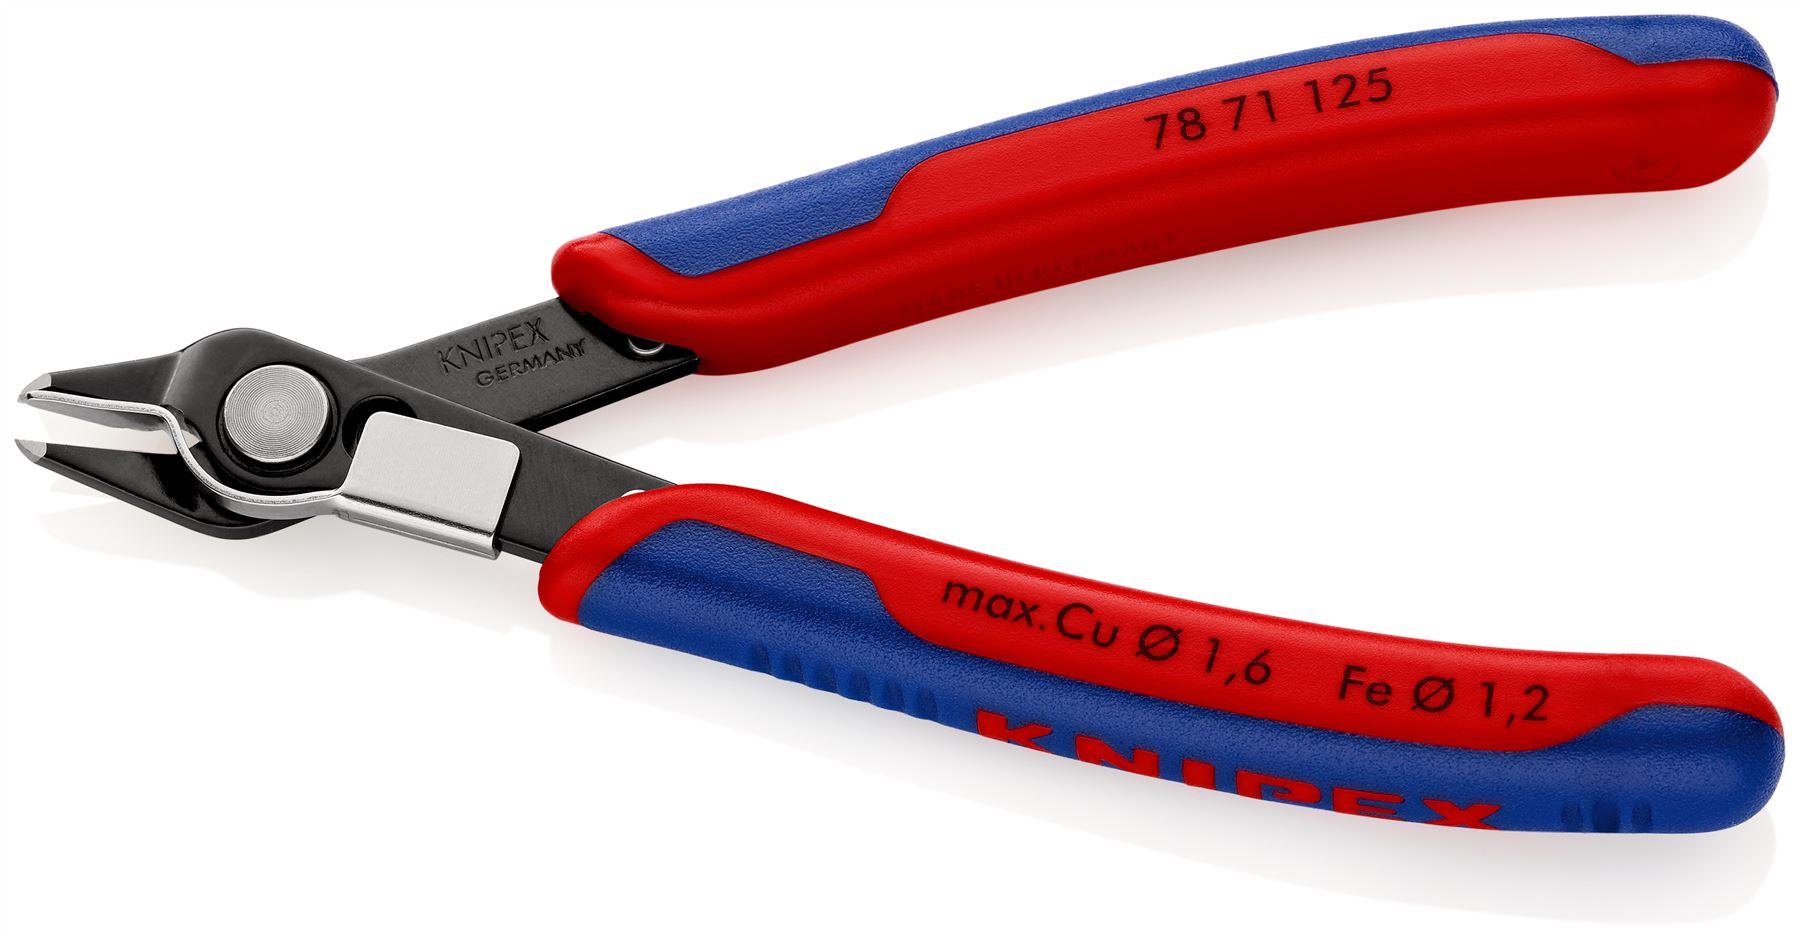 KNIPEX Electronics Super Knips Precision Cutting Pliers 125mm Multi Component Grips 78 71 125